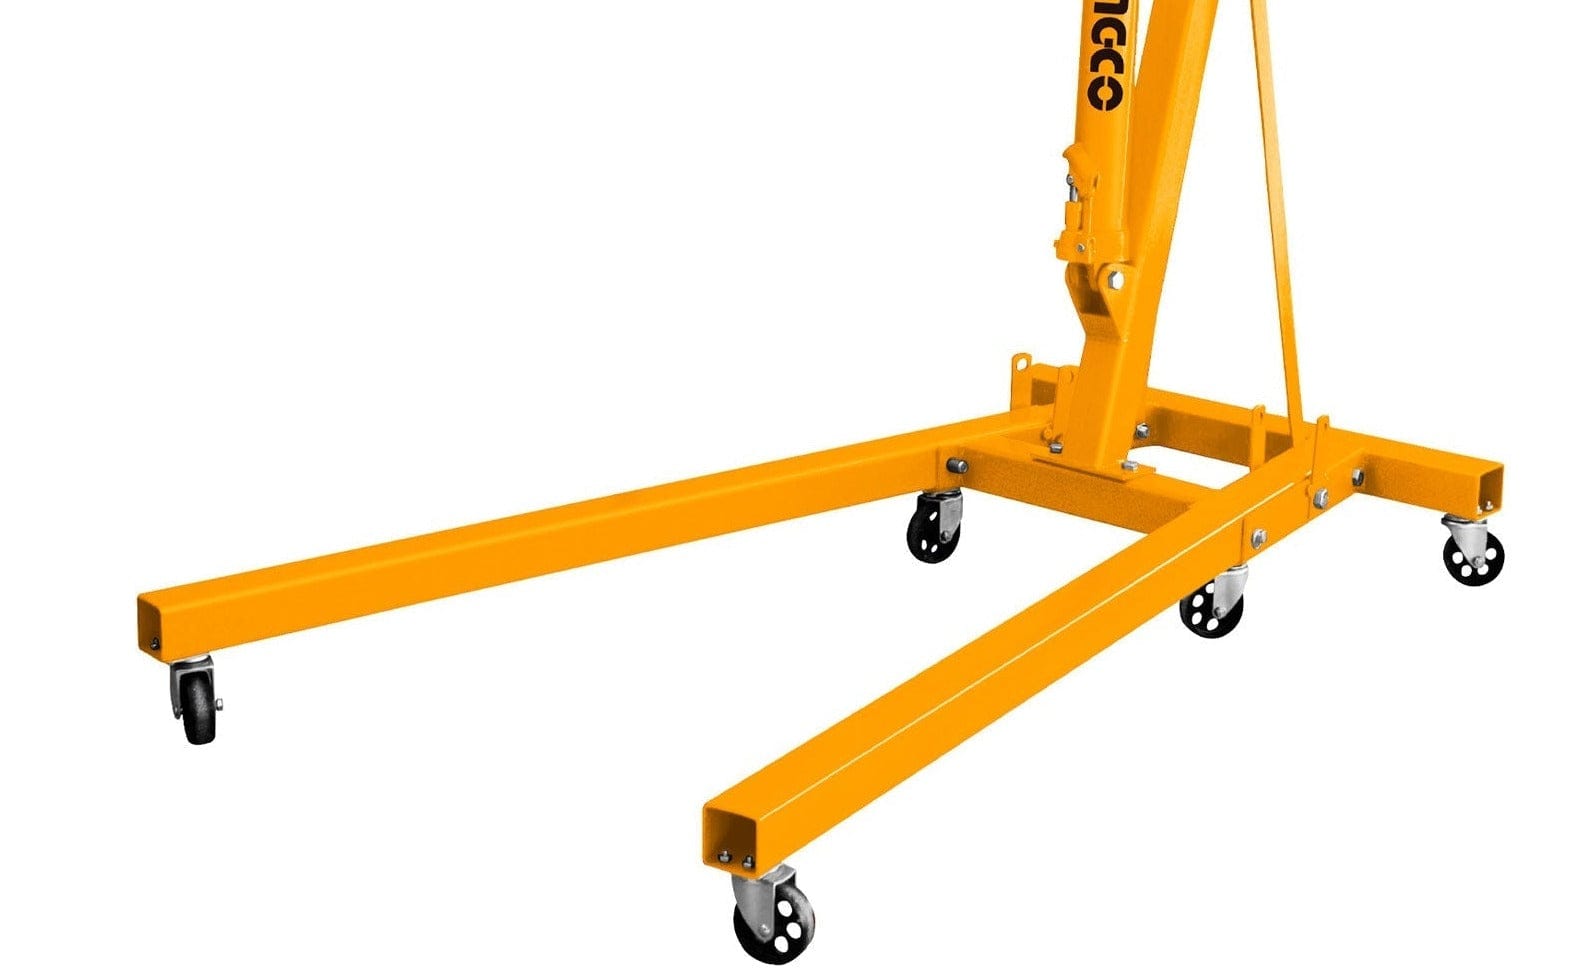 Ingco 2 Ton Hydraulic Engine Crane for Base Part - HEC21-1 | Supply Master | Accra, Ghana Towing and Lifting Buy Tools hardware Building materials